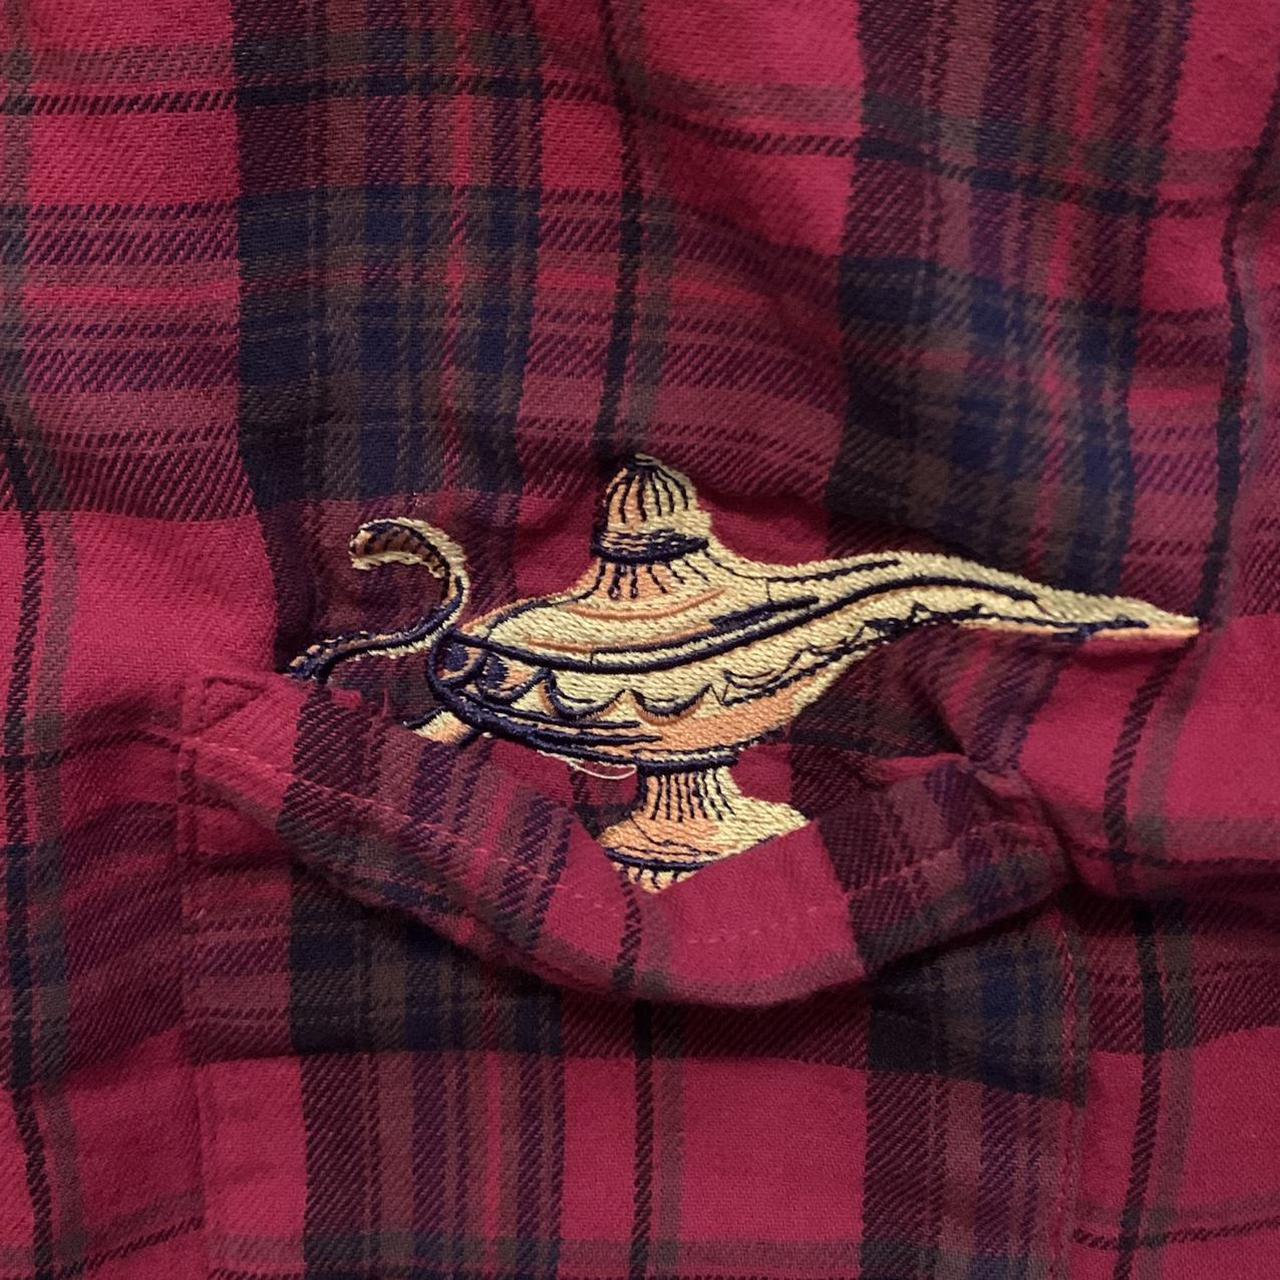 Product Image 4 - Disney’s Aladdin flannel from Cakeworthy.